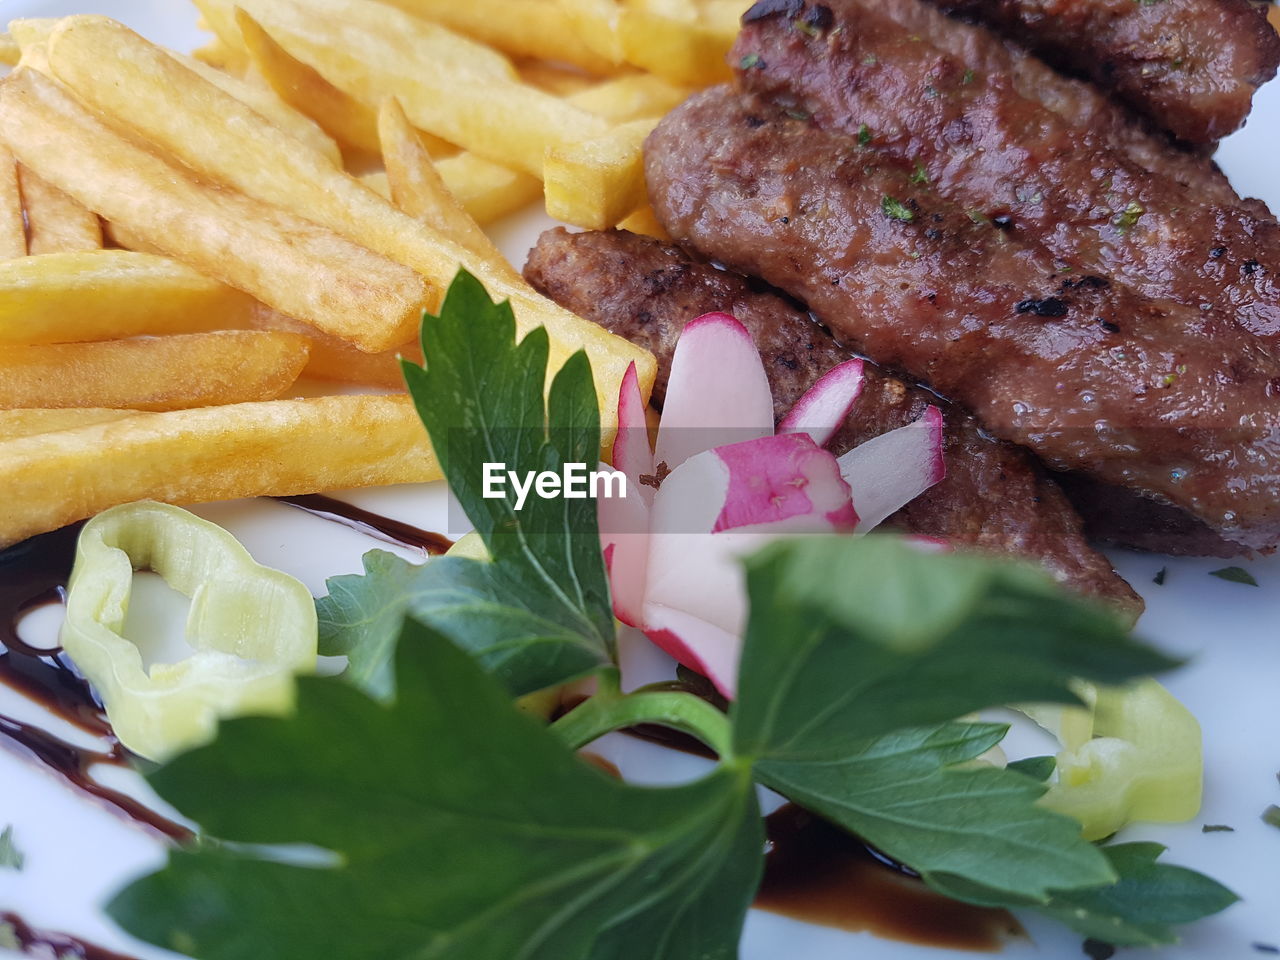 Close-up of meat and french fries served in plate